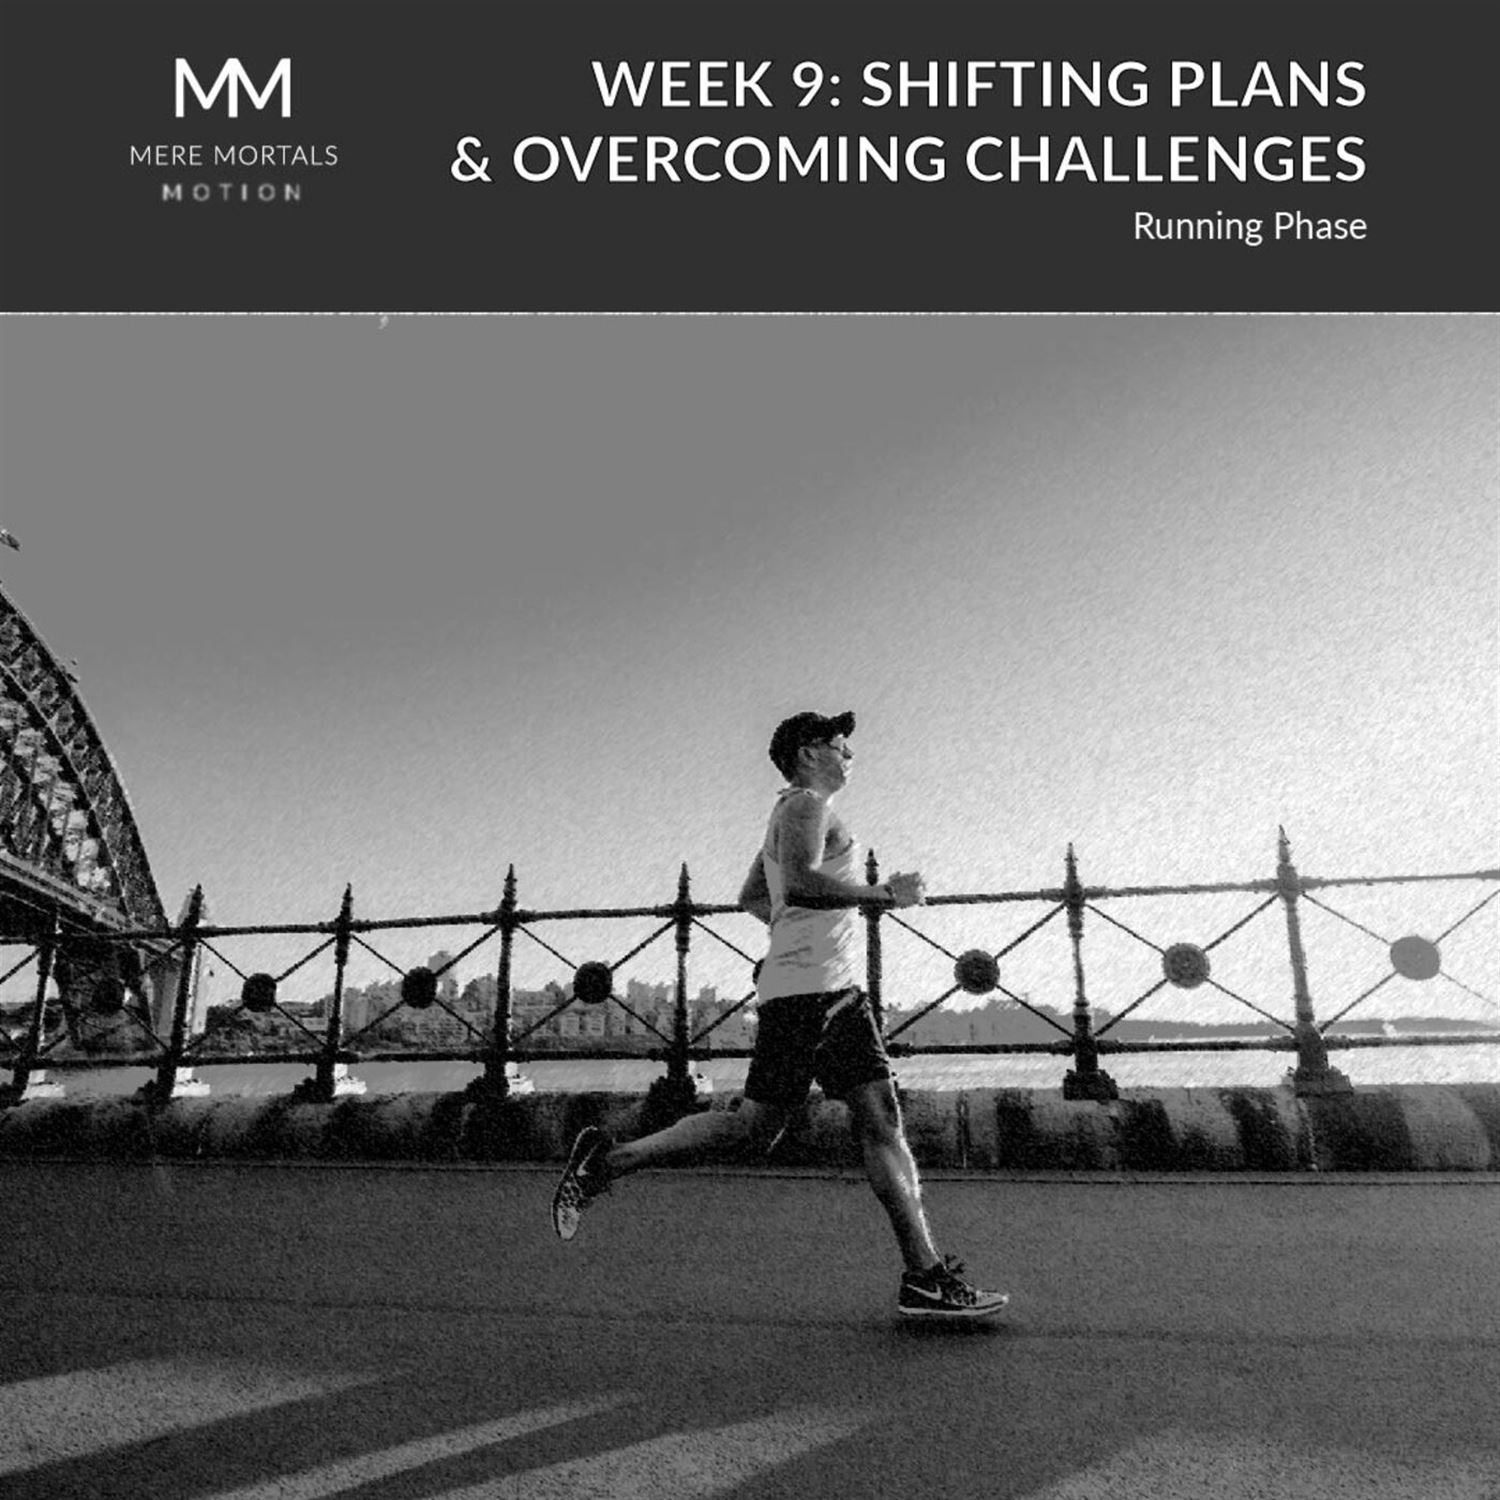 Shifting Plans & Overcoming Challenges, Week 9 | Mere Mortals in Motion